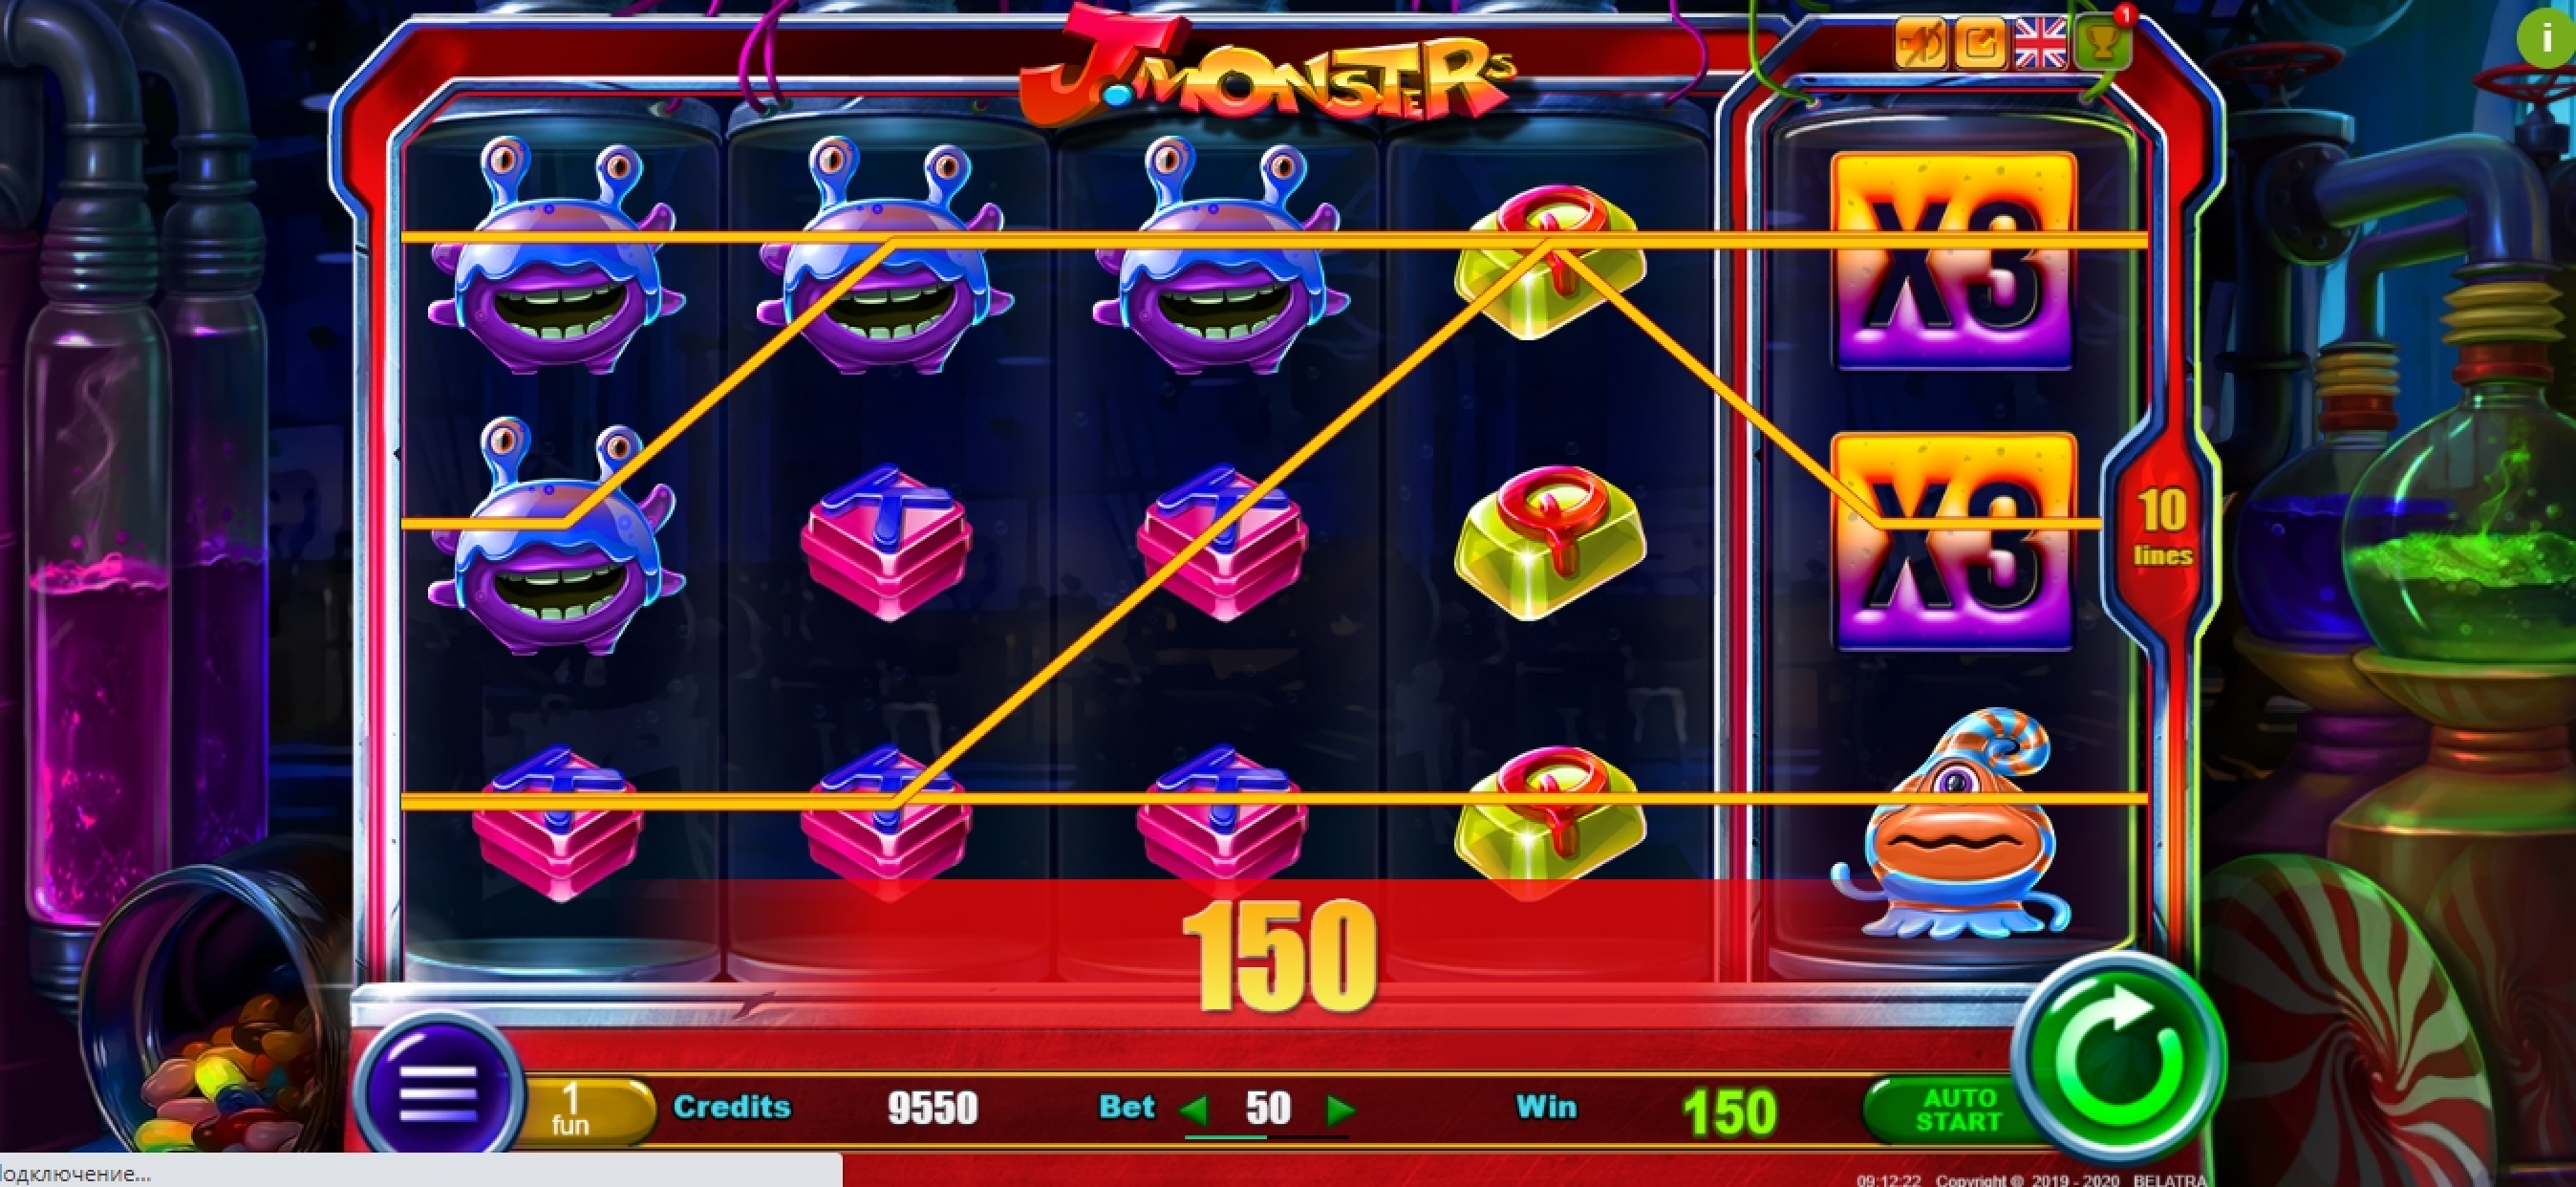 Win Money in J. Monsters Free Slot Game by Belatra Games